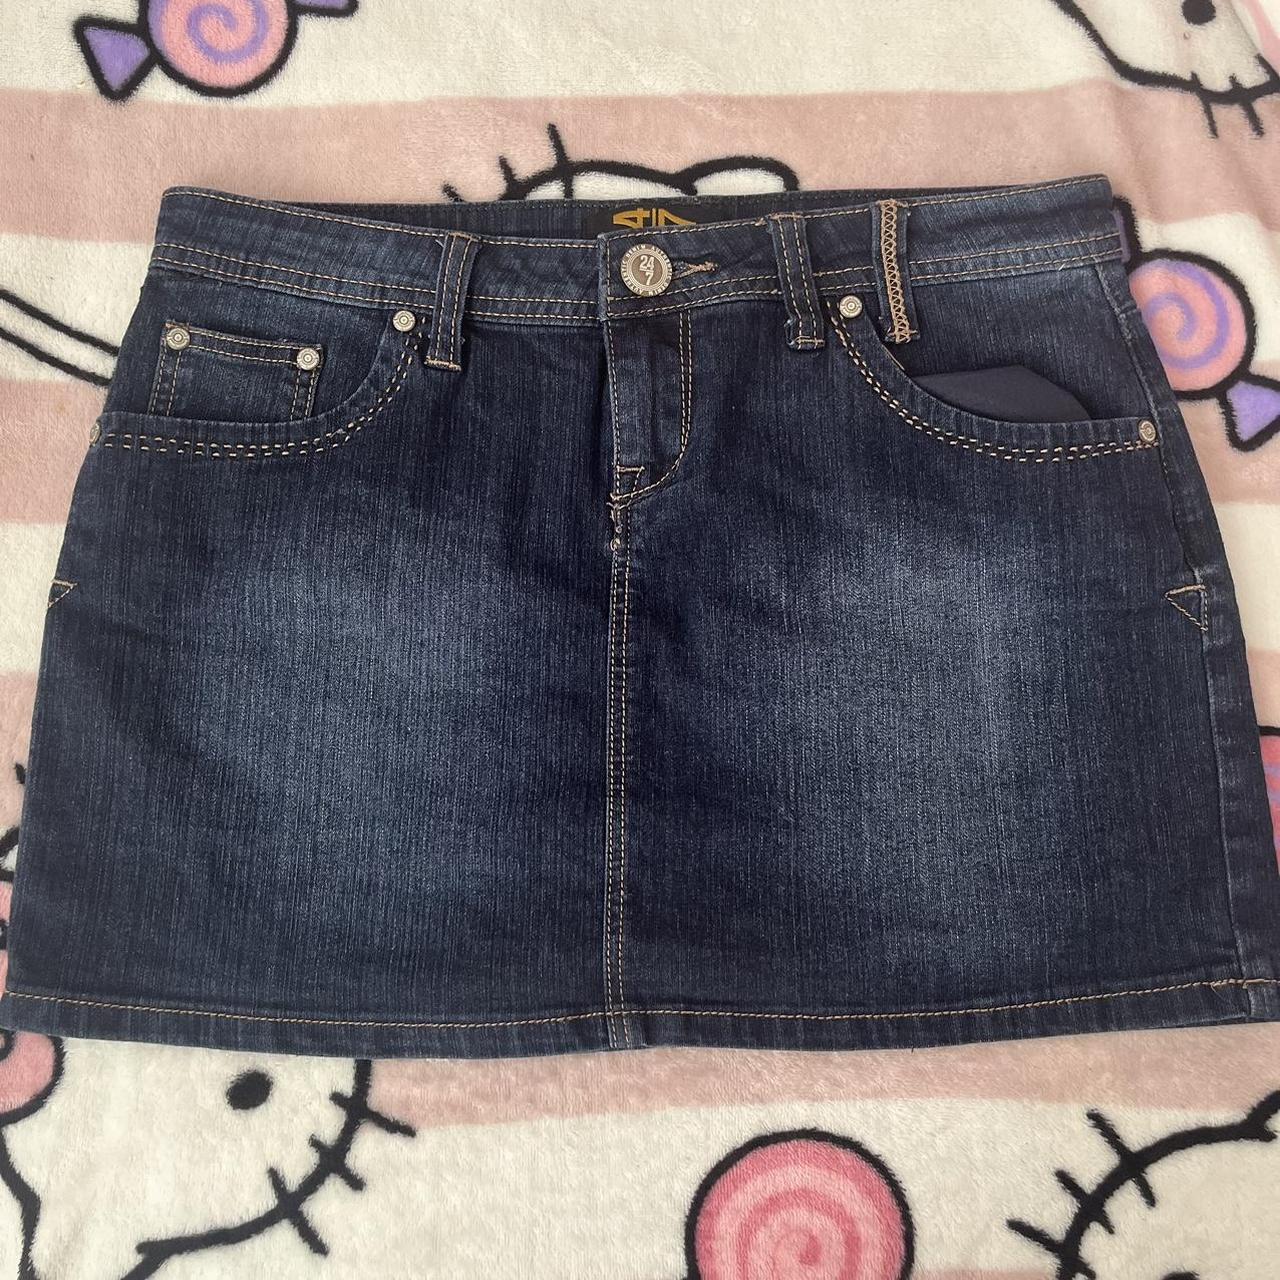 denim mini skirt Use to fit me lovely but doesn’t... - Depop